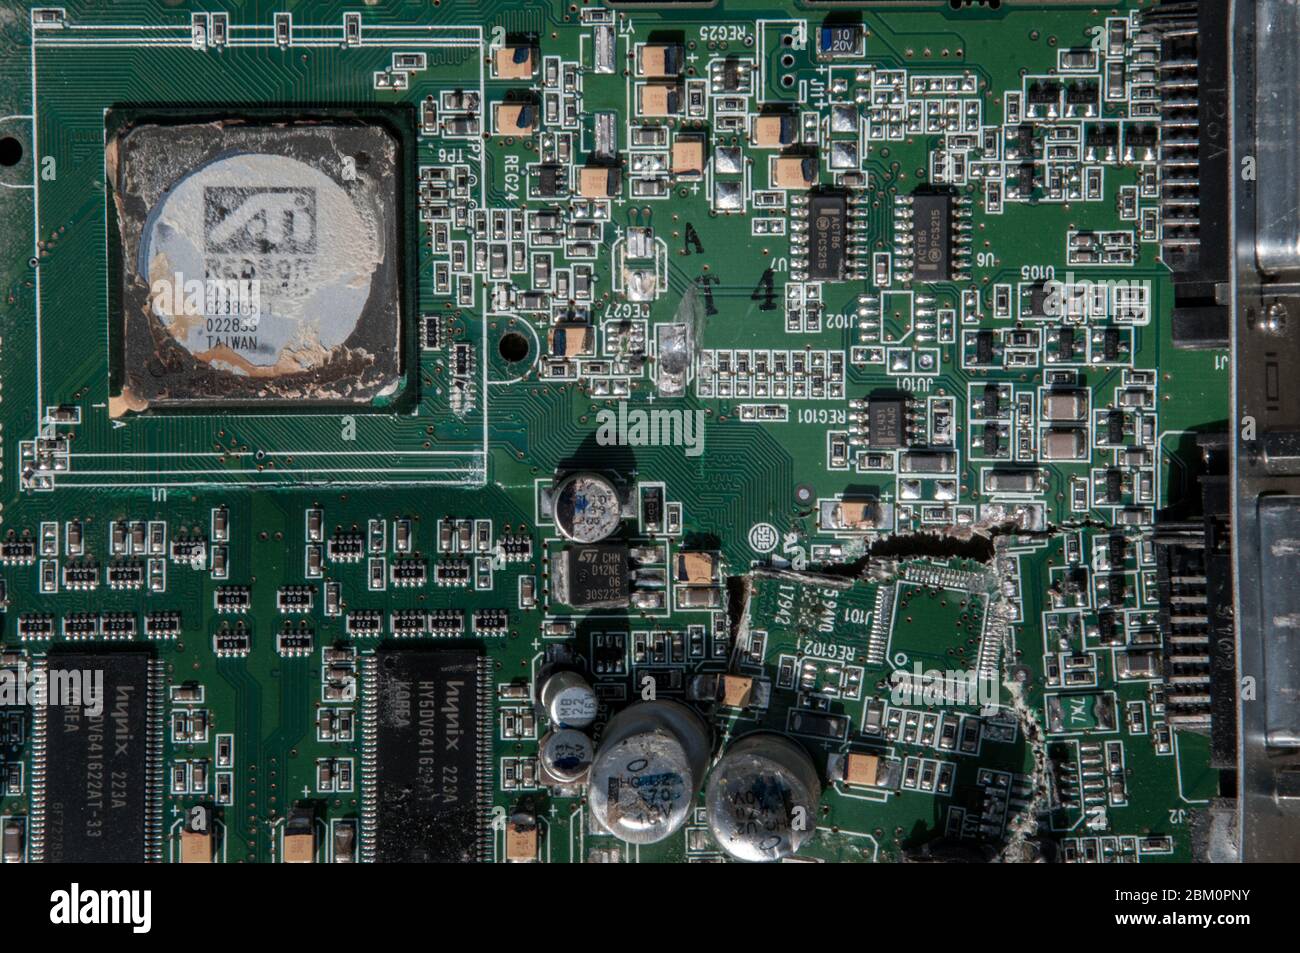 Smashed and broken computer circuit board. Stock Photo